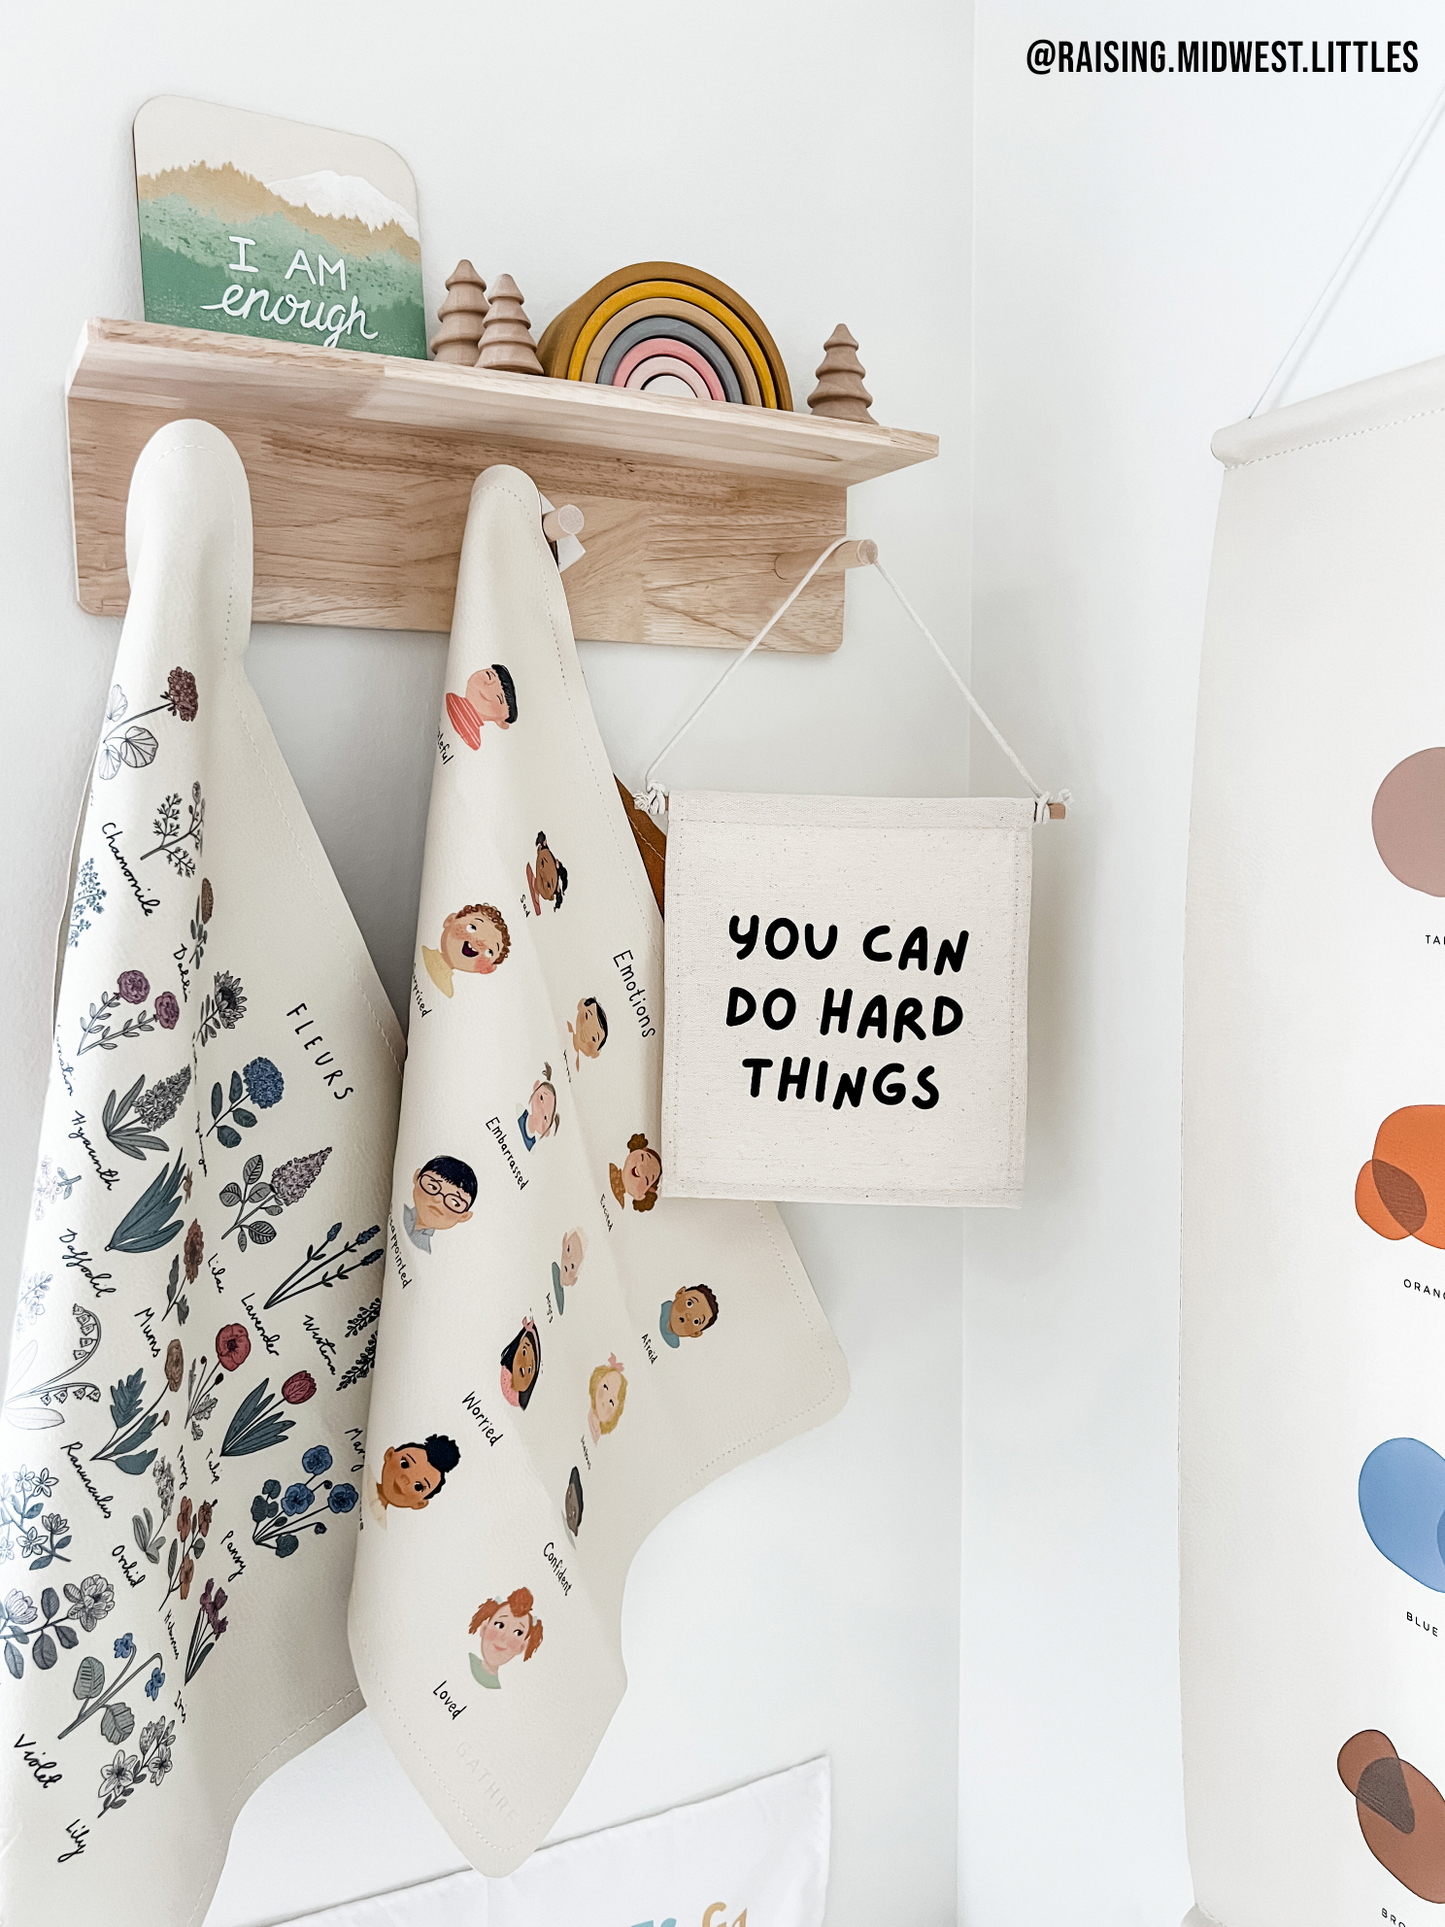 You Can Do Hard Things Canvas Hang Sign